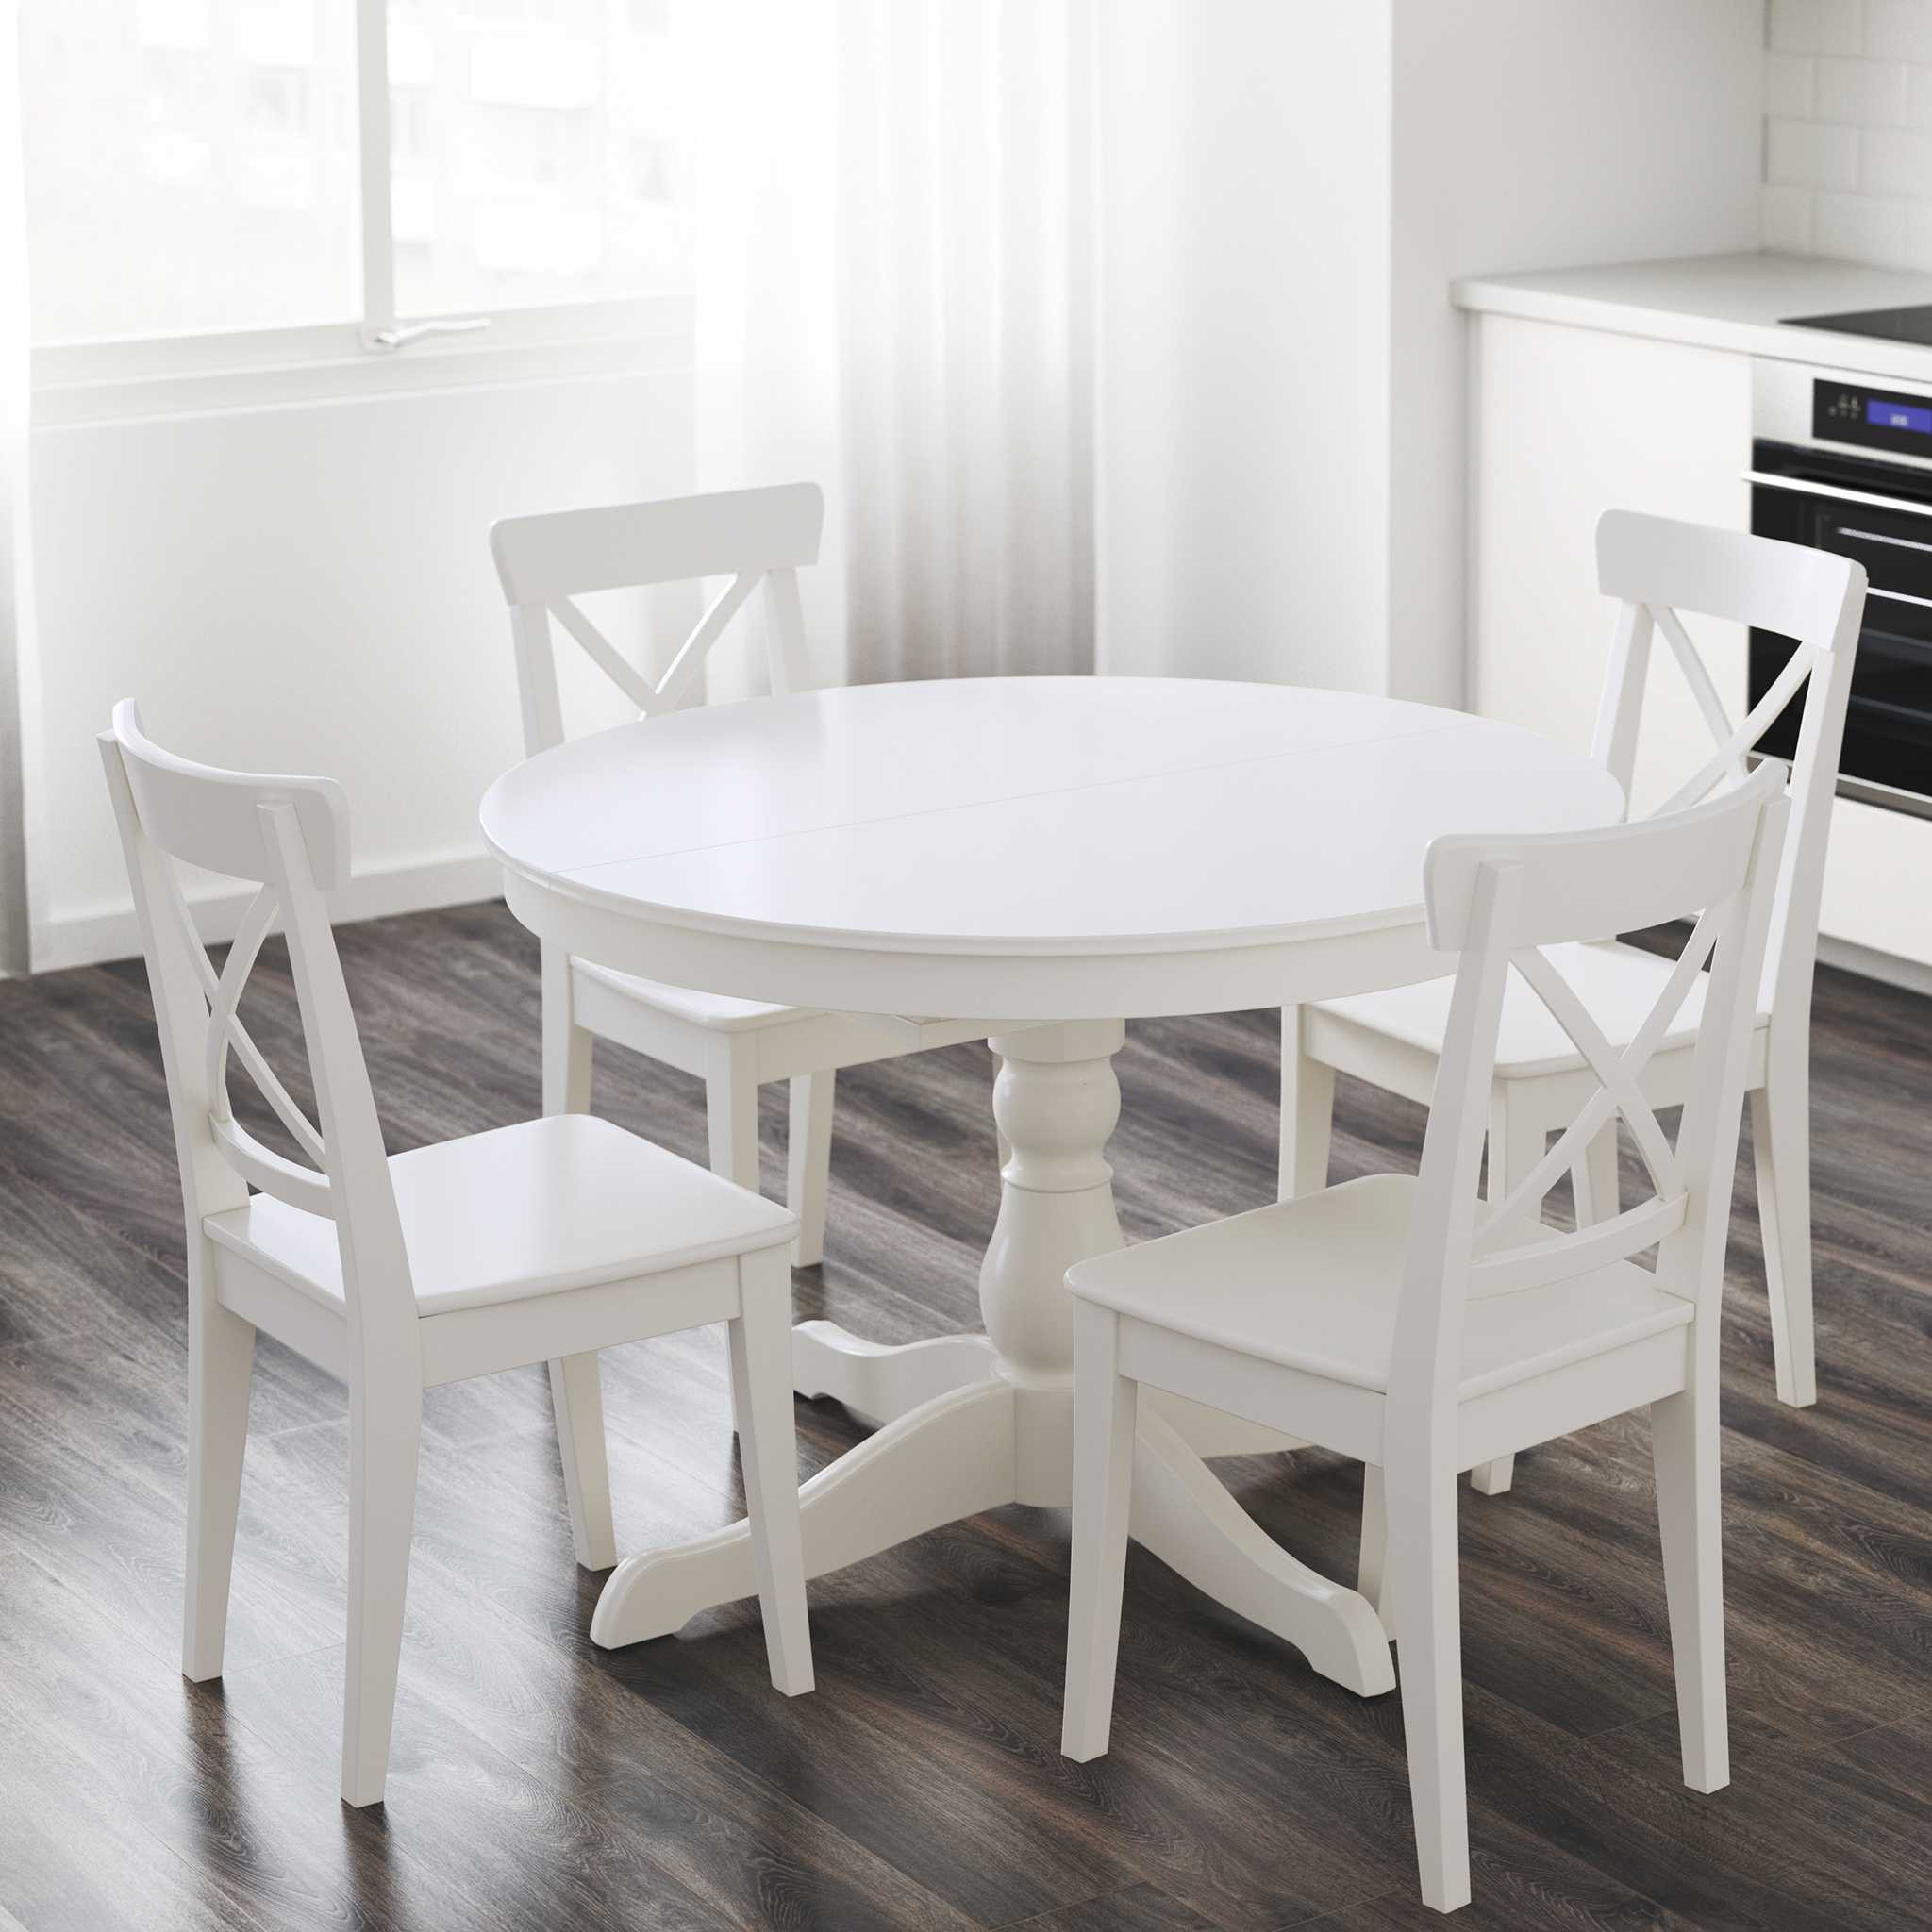 Small Kitchen Table Ikea
 Ikea Dining Kitchen Tables For Small Spaces And